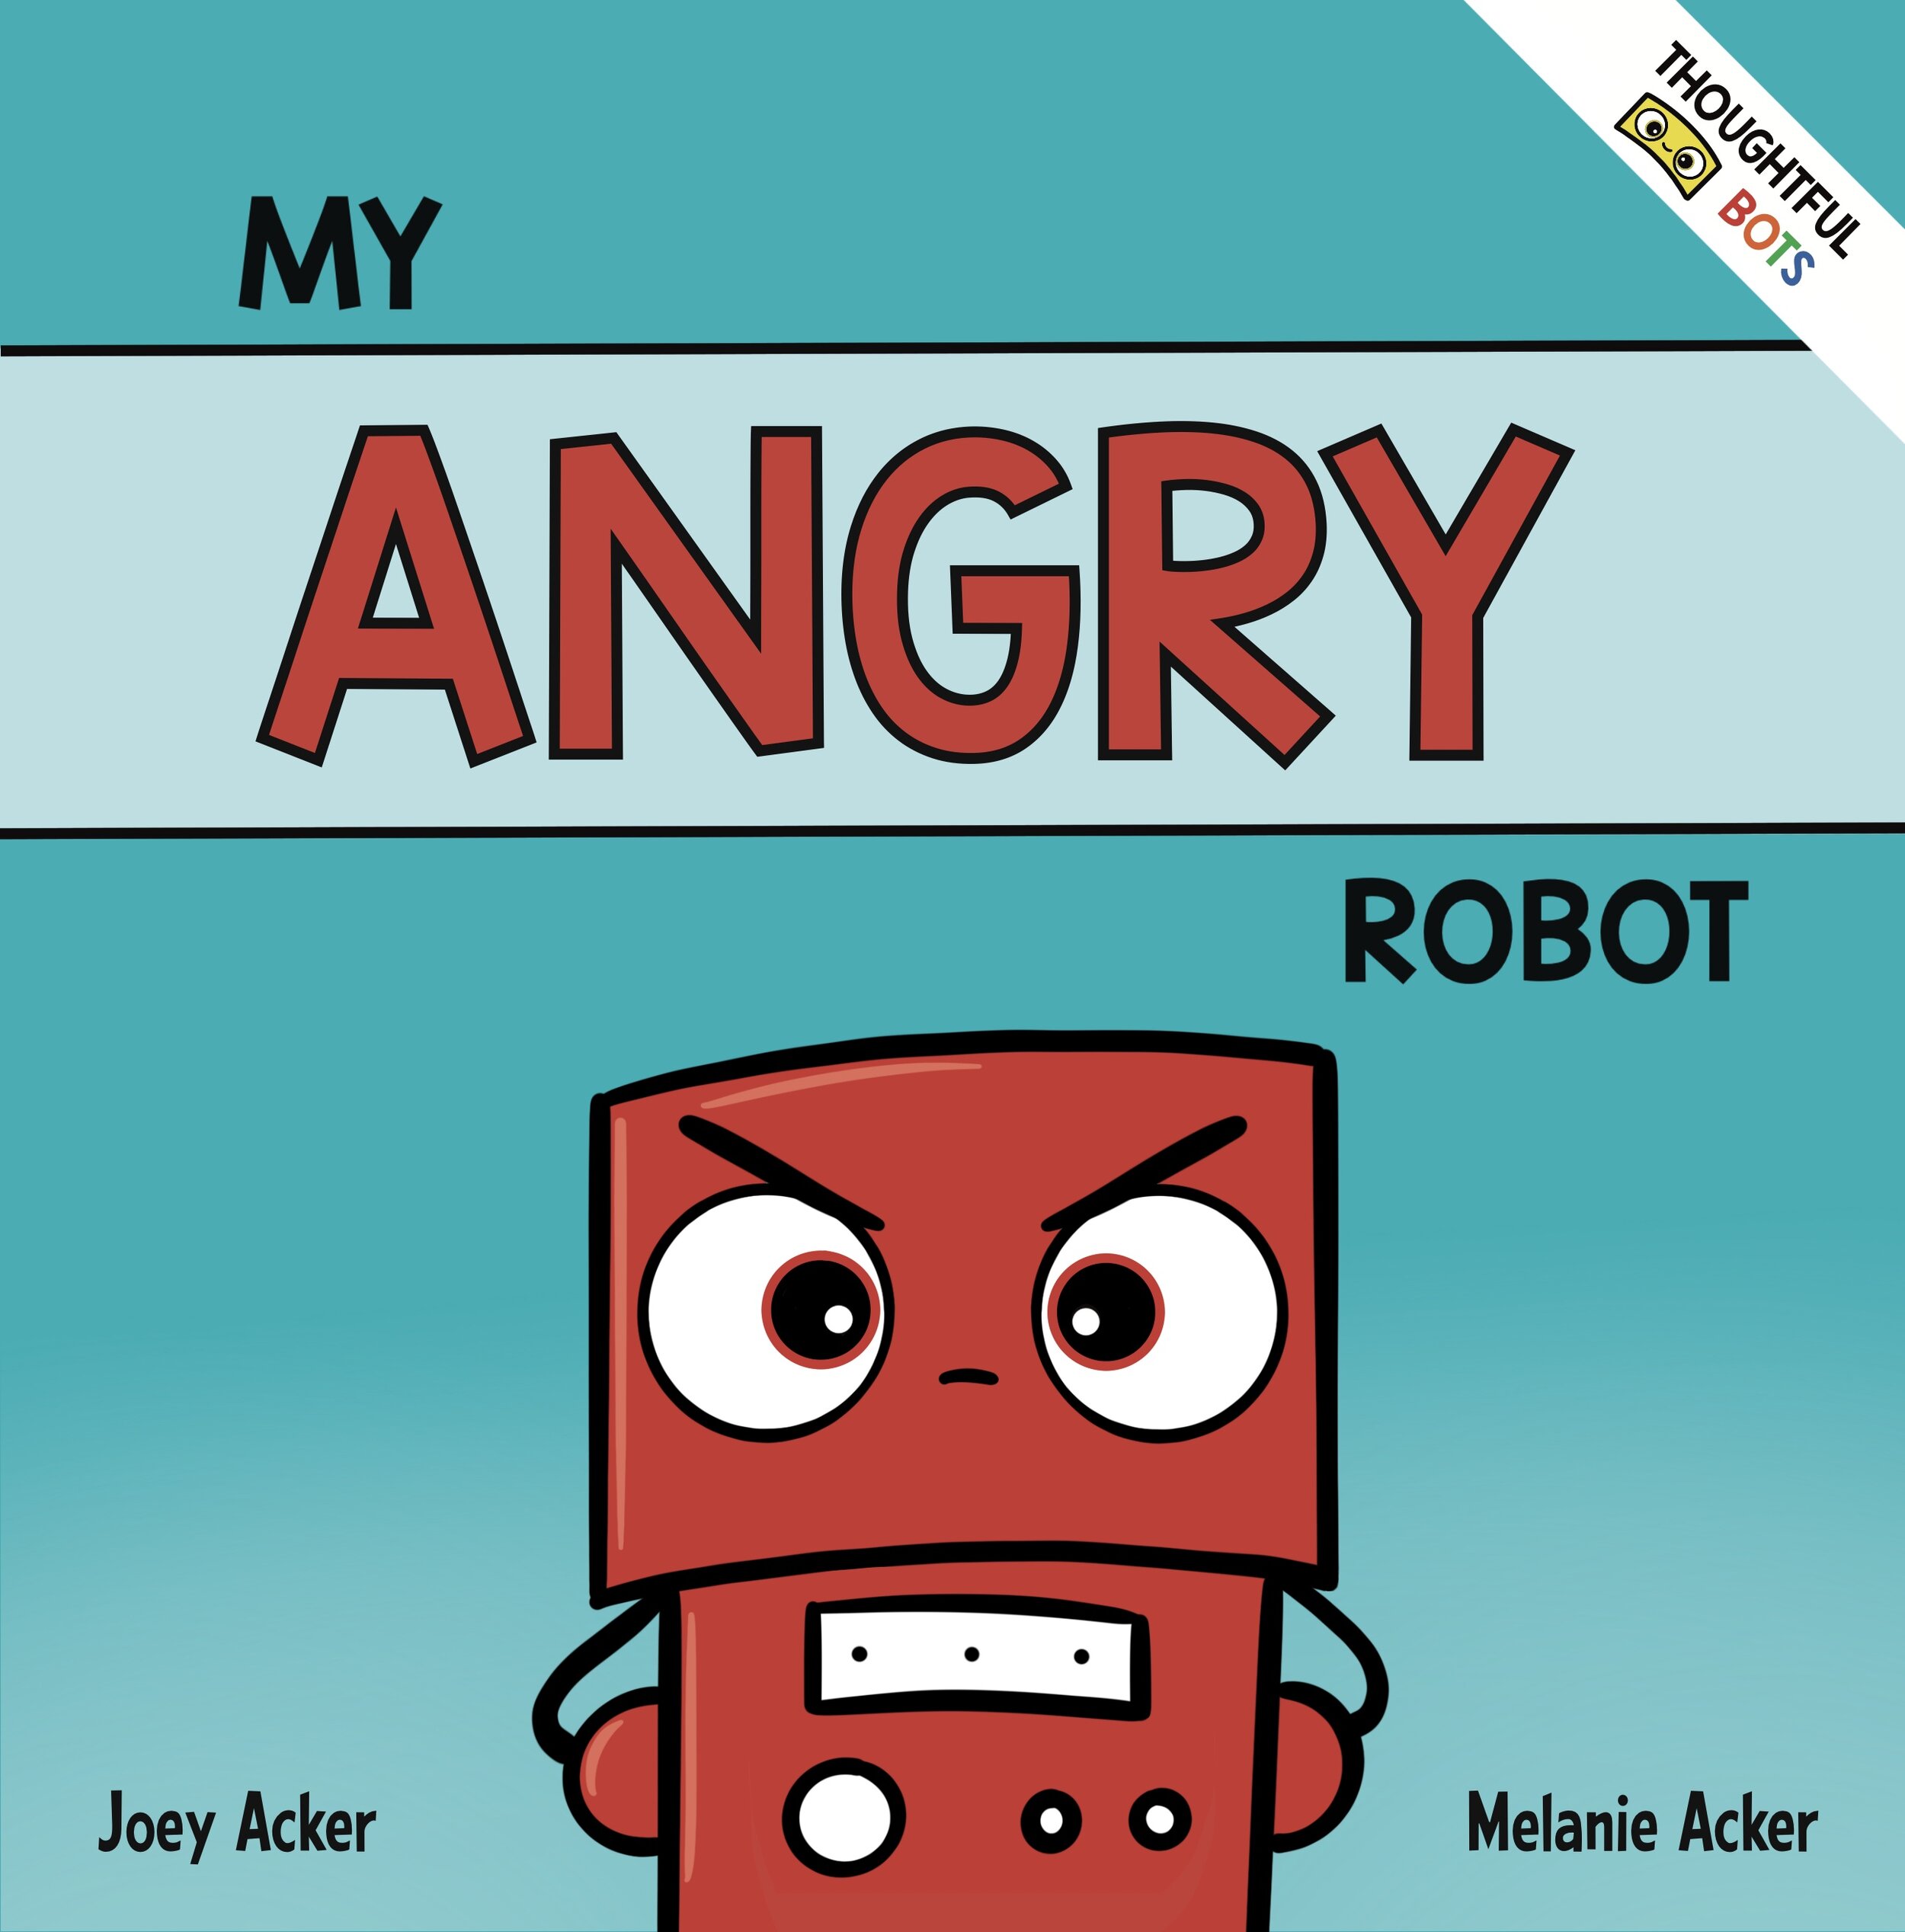 Final_Angry_Bot_eBook_Cover.jpg